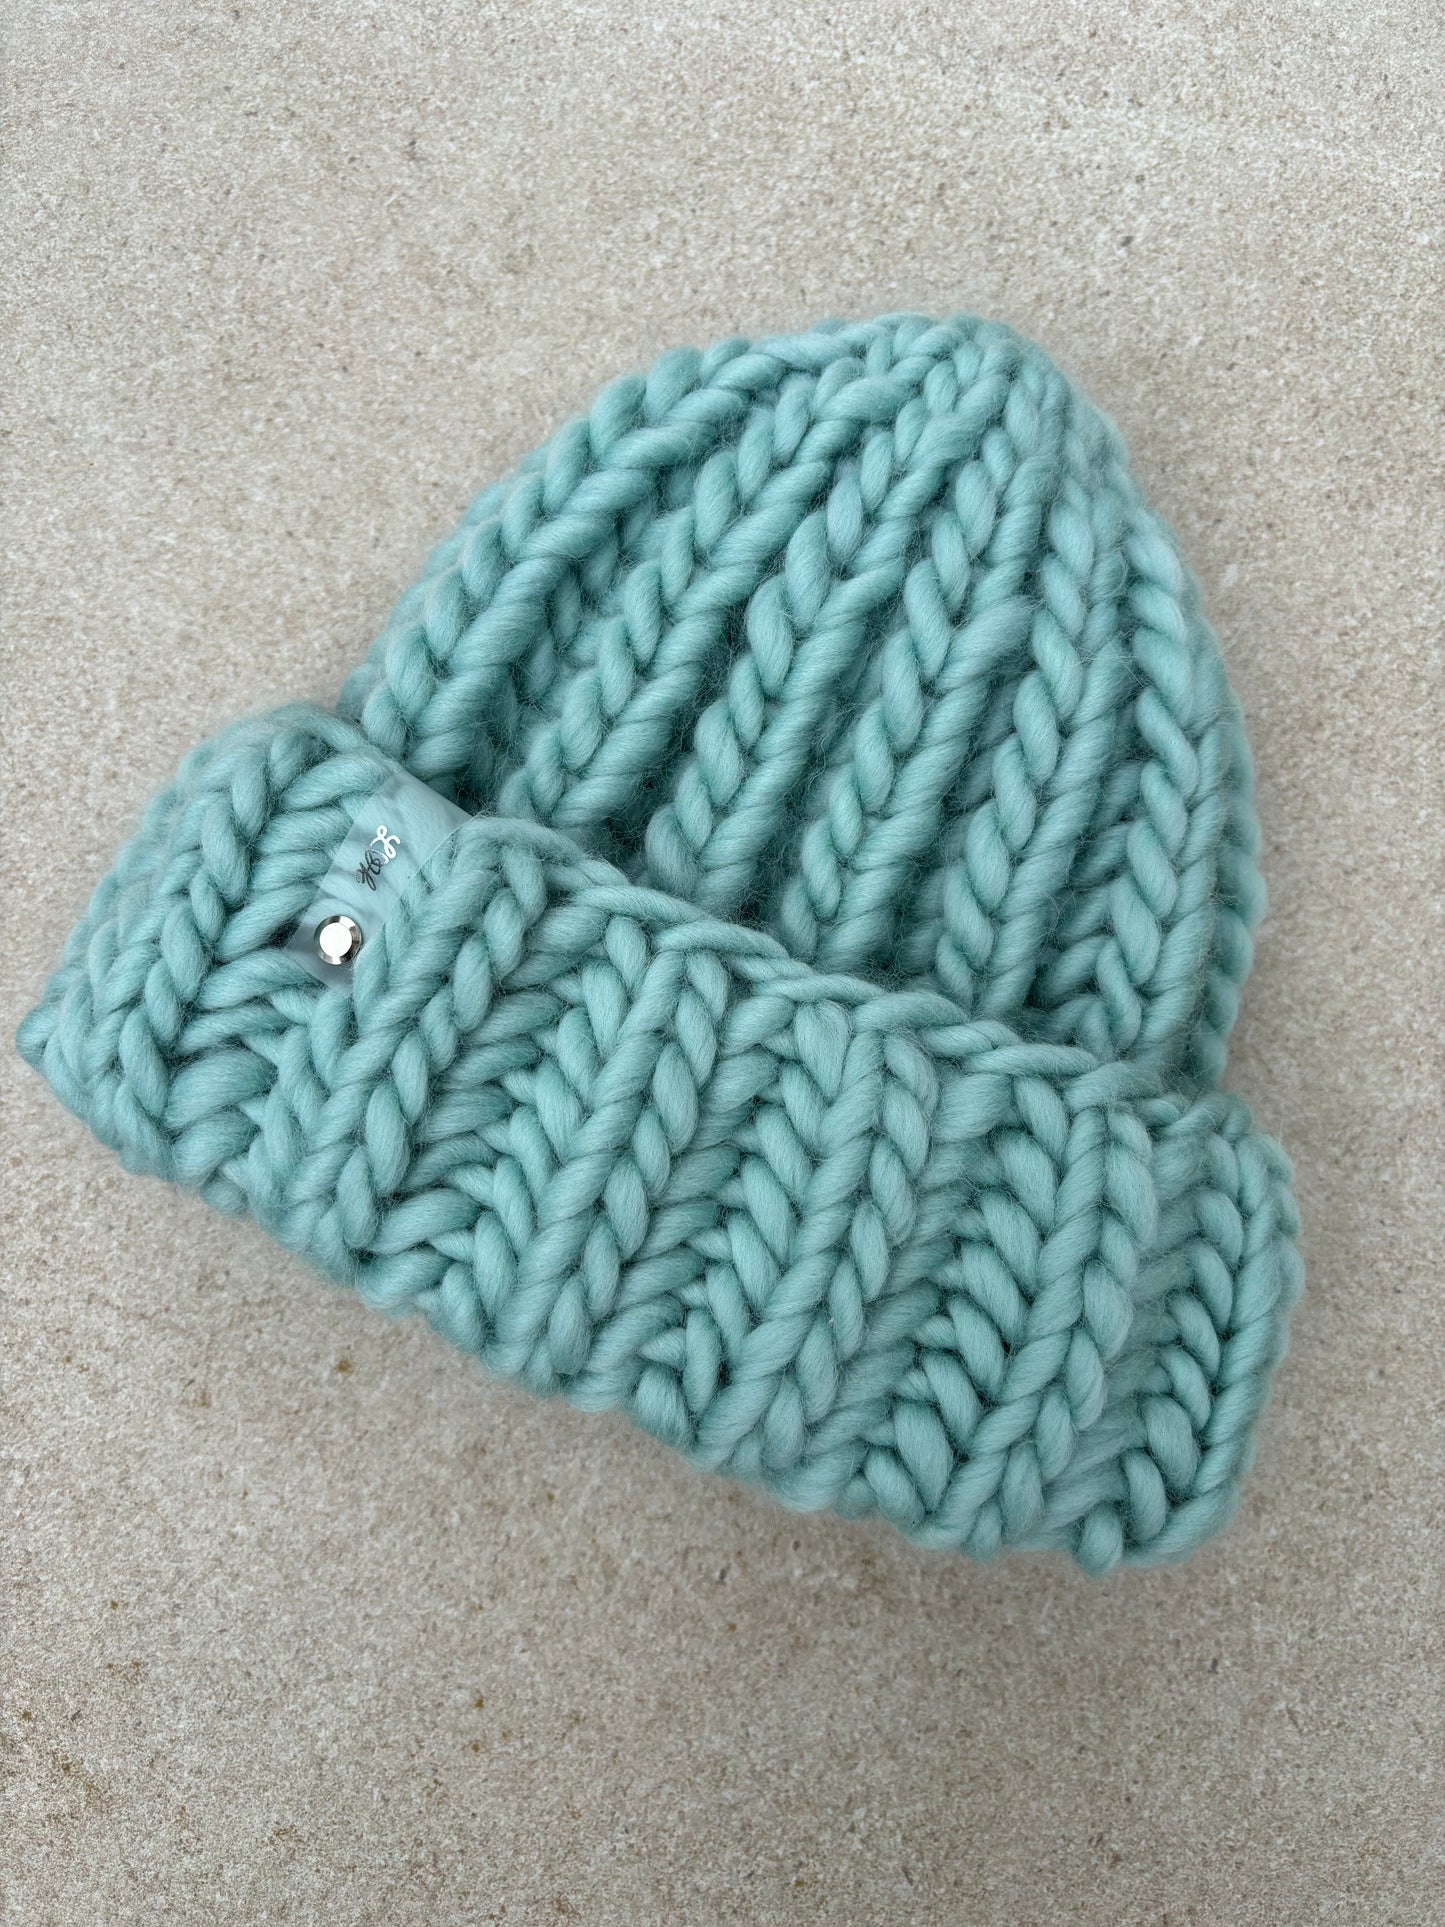 Hand-knitted beanie made of extra thick wool